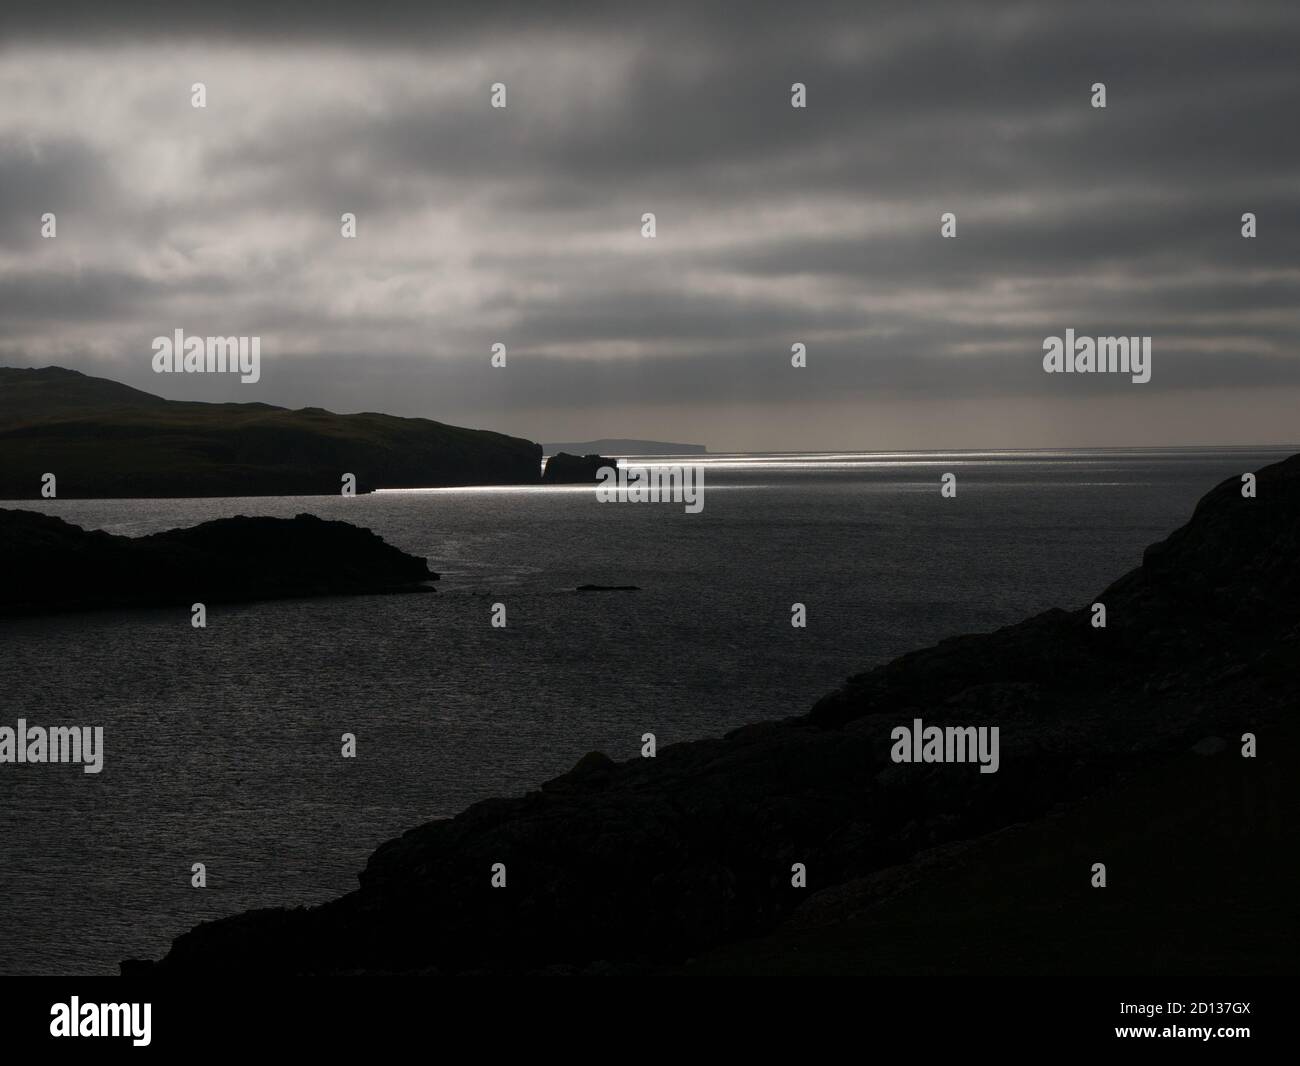 In black and white, a moody, threatening view of sunlight on the water across Magnus Bay from hillside at Islesburgh near Mavis Grind,  Shetland, UK. Stock Photo